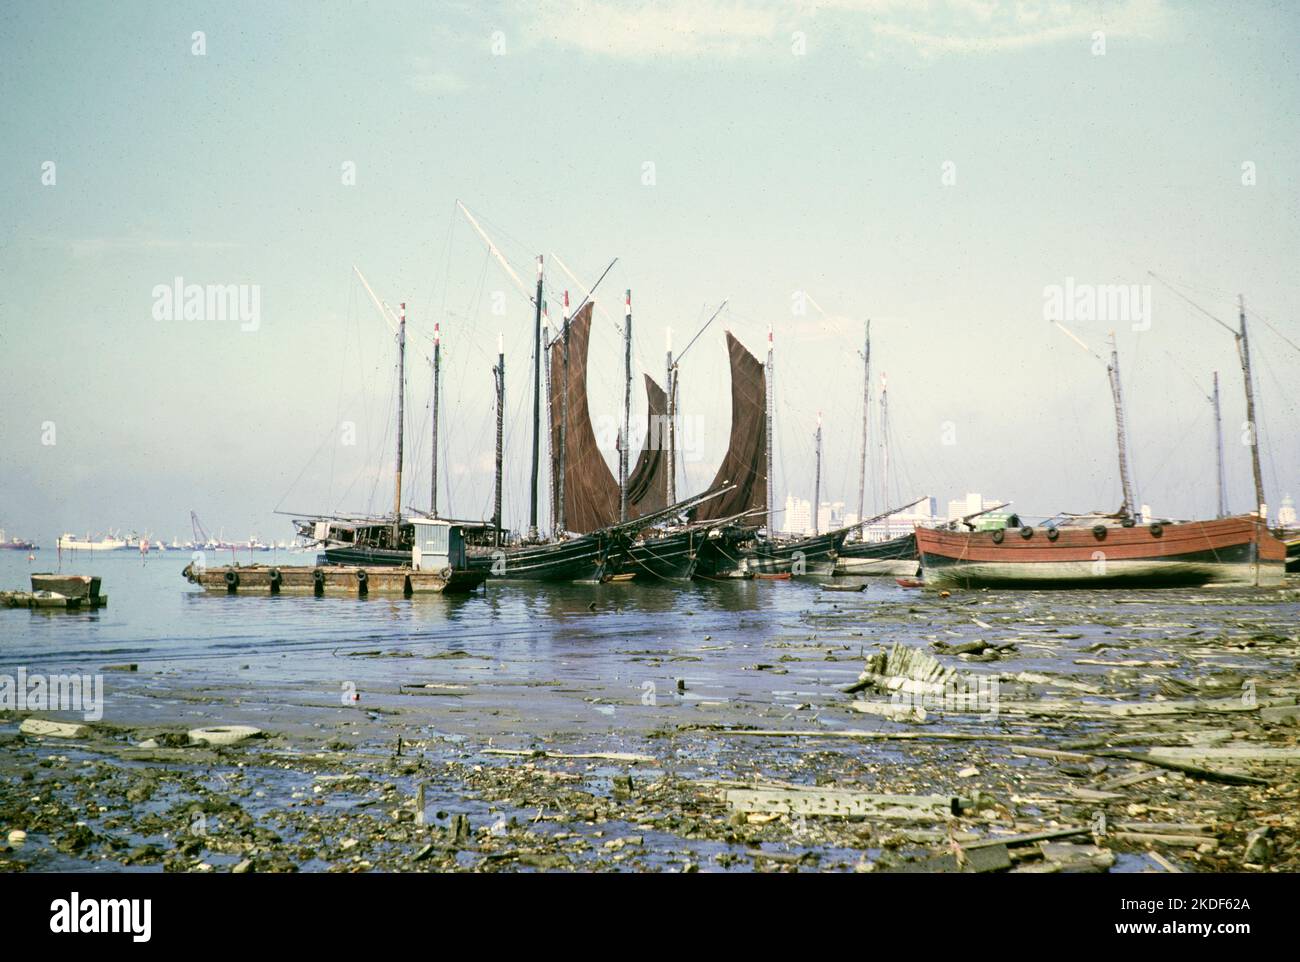 Traditional wooden sailing ships amd other boats, Fountain or Kallang Basin, Singapore, Asia 1971 Stock Photo